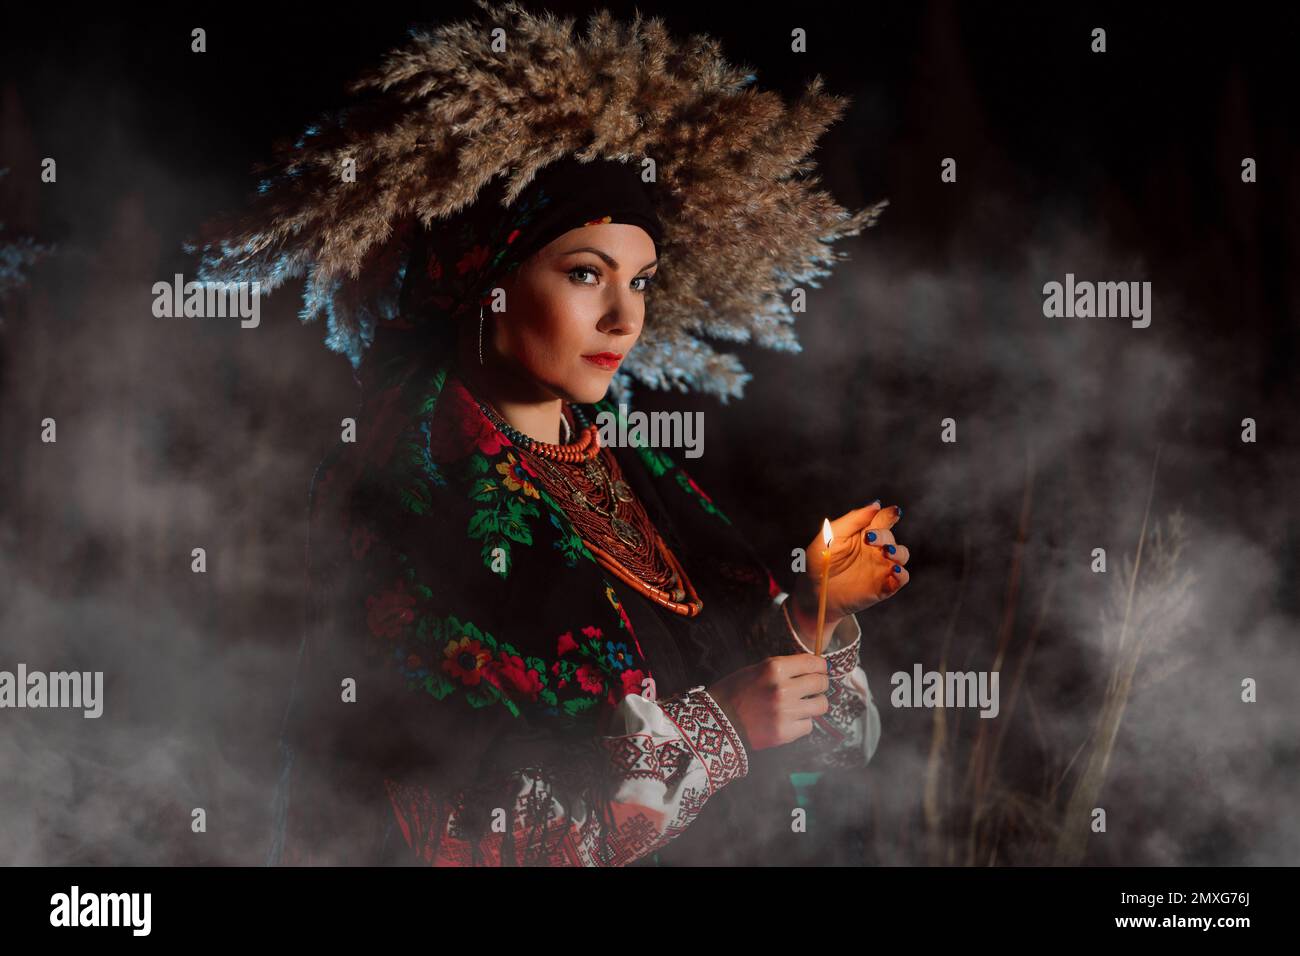 Mysterious ukrainian woman with candle, she in traditional costume outdoors at night. Lady in authentic jewelry. Beauty of Ukraine, ethnic clothing, d Stock Photo